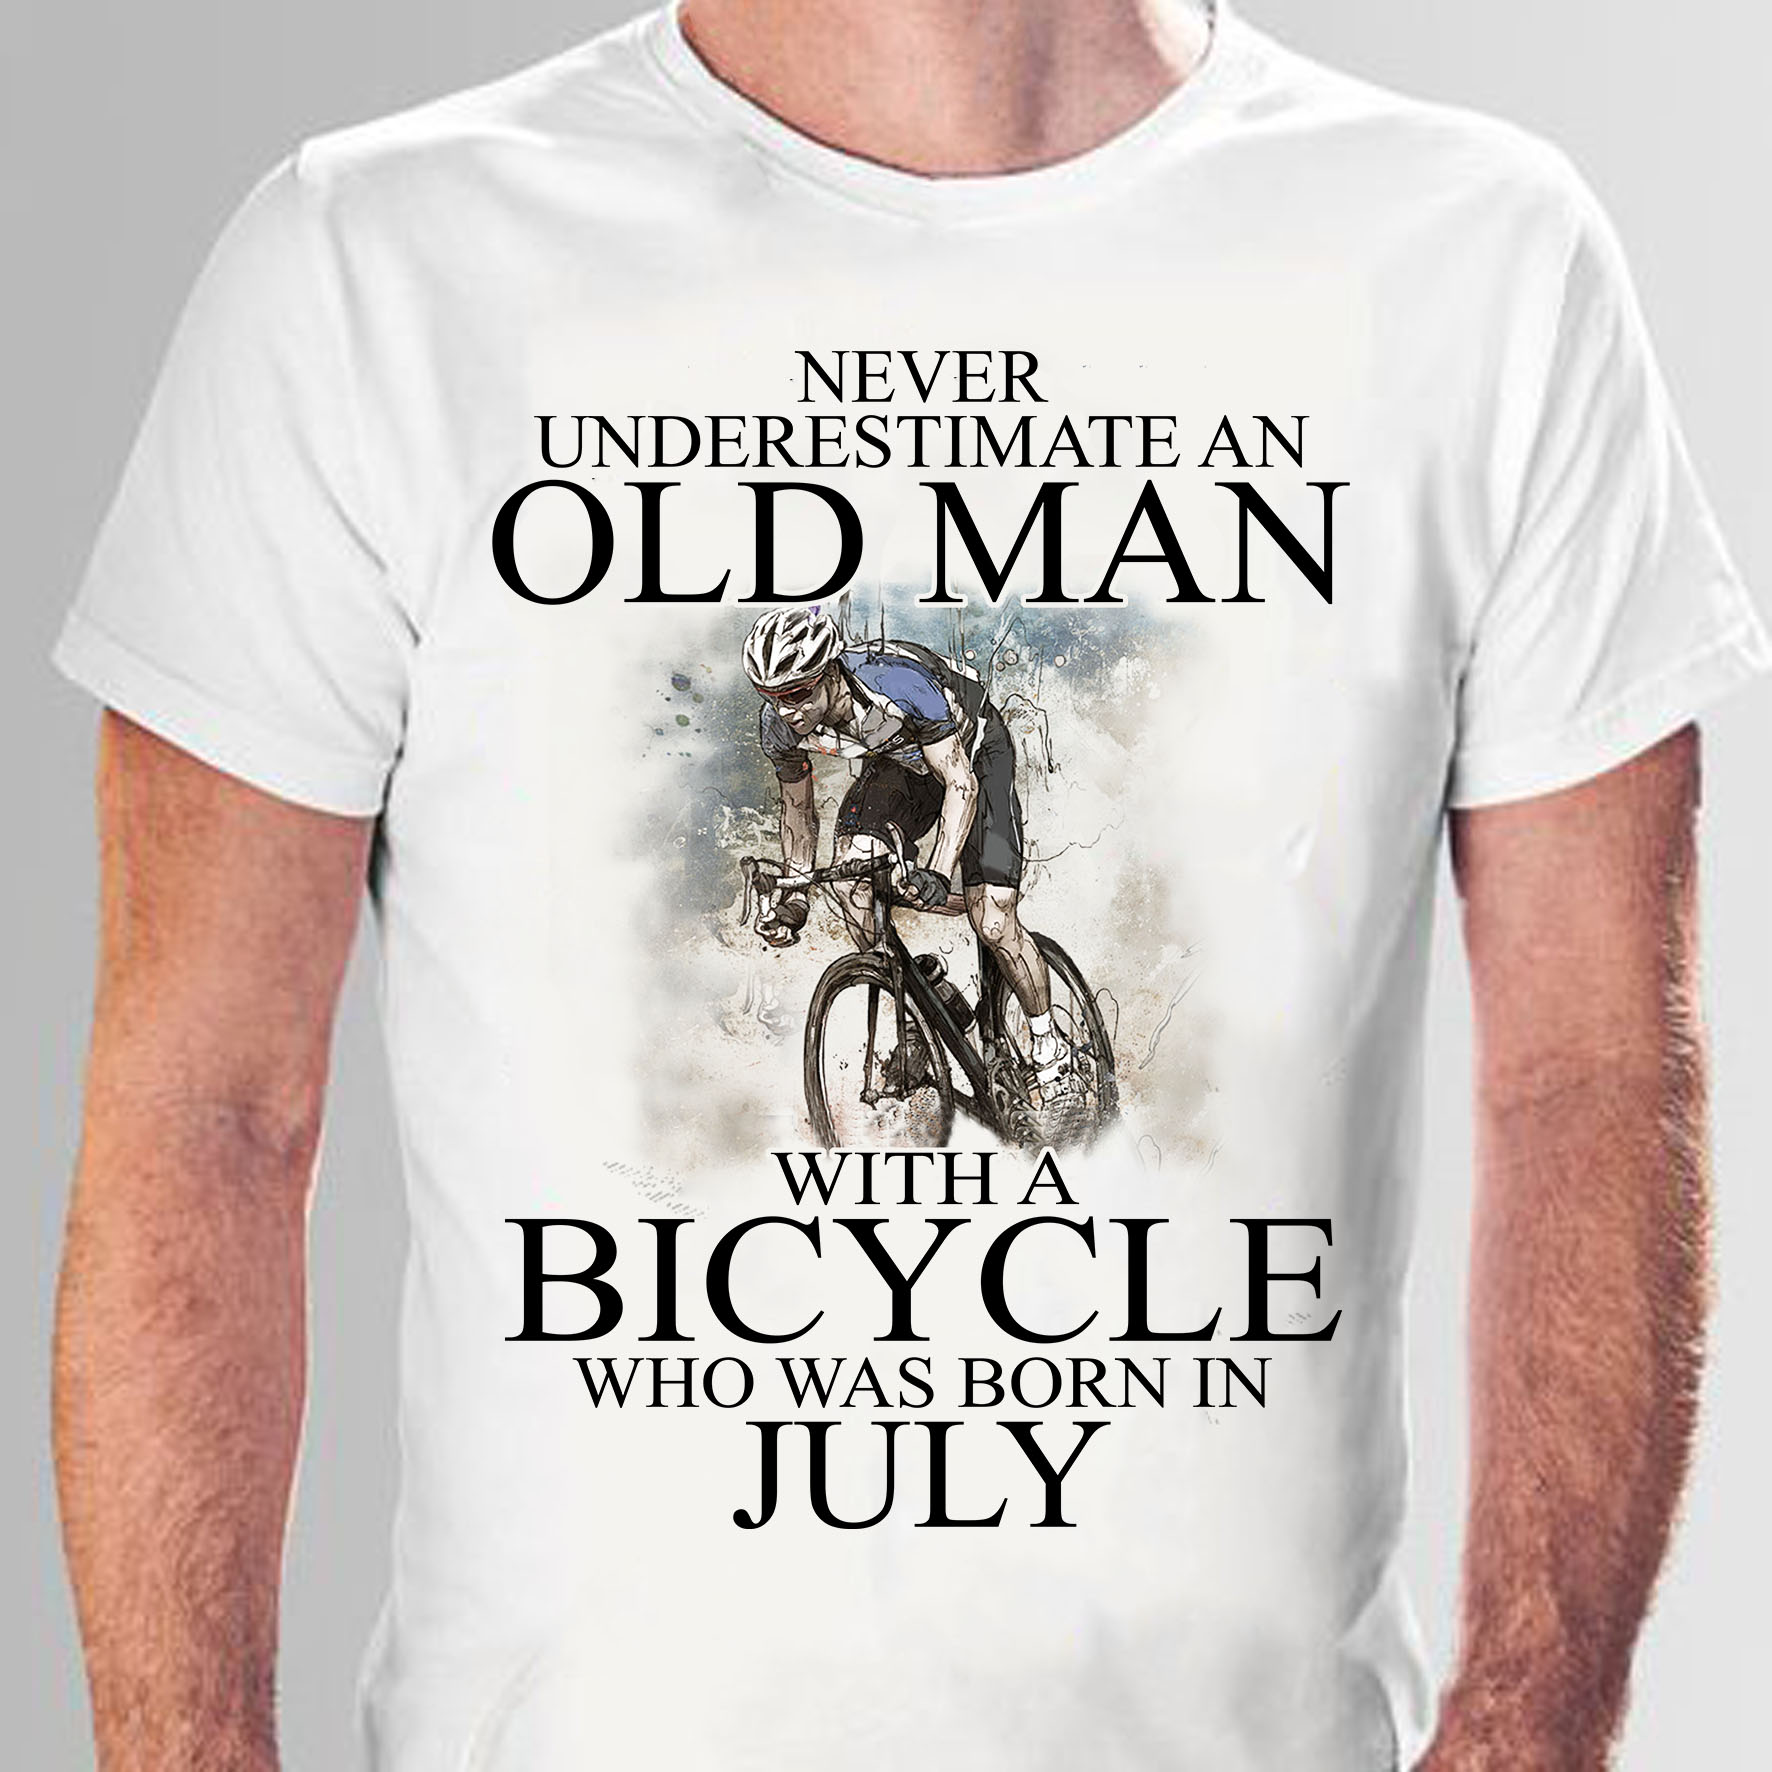 Never underestimate an old man with a bicycle who was born in July